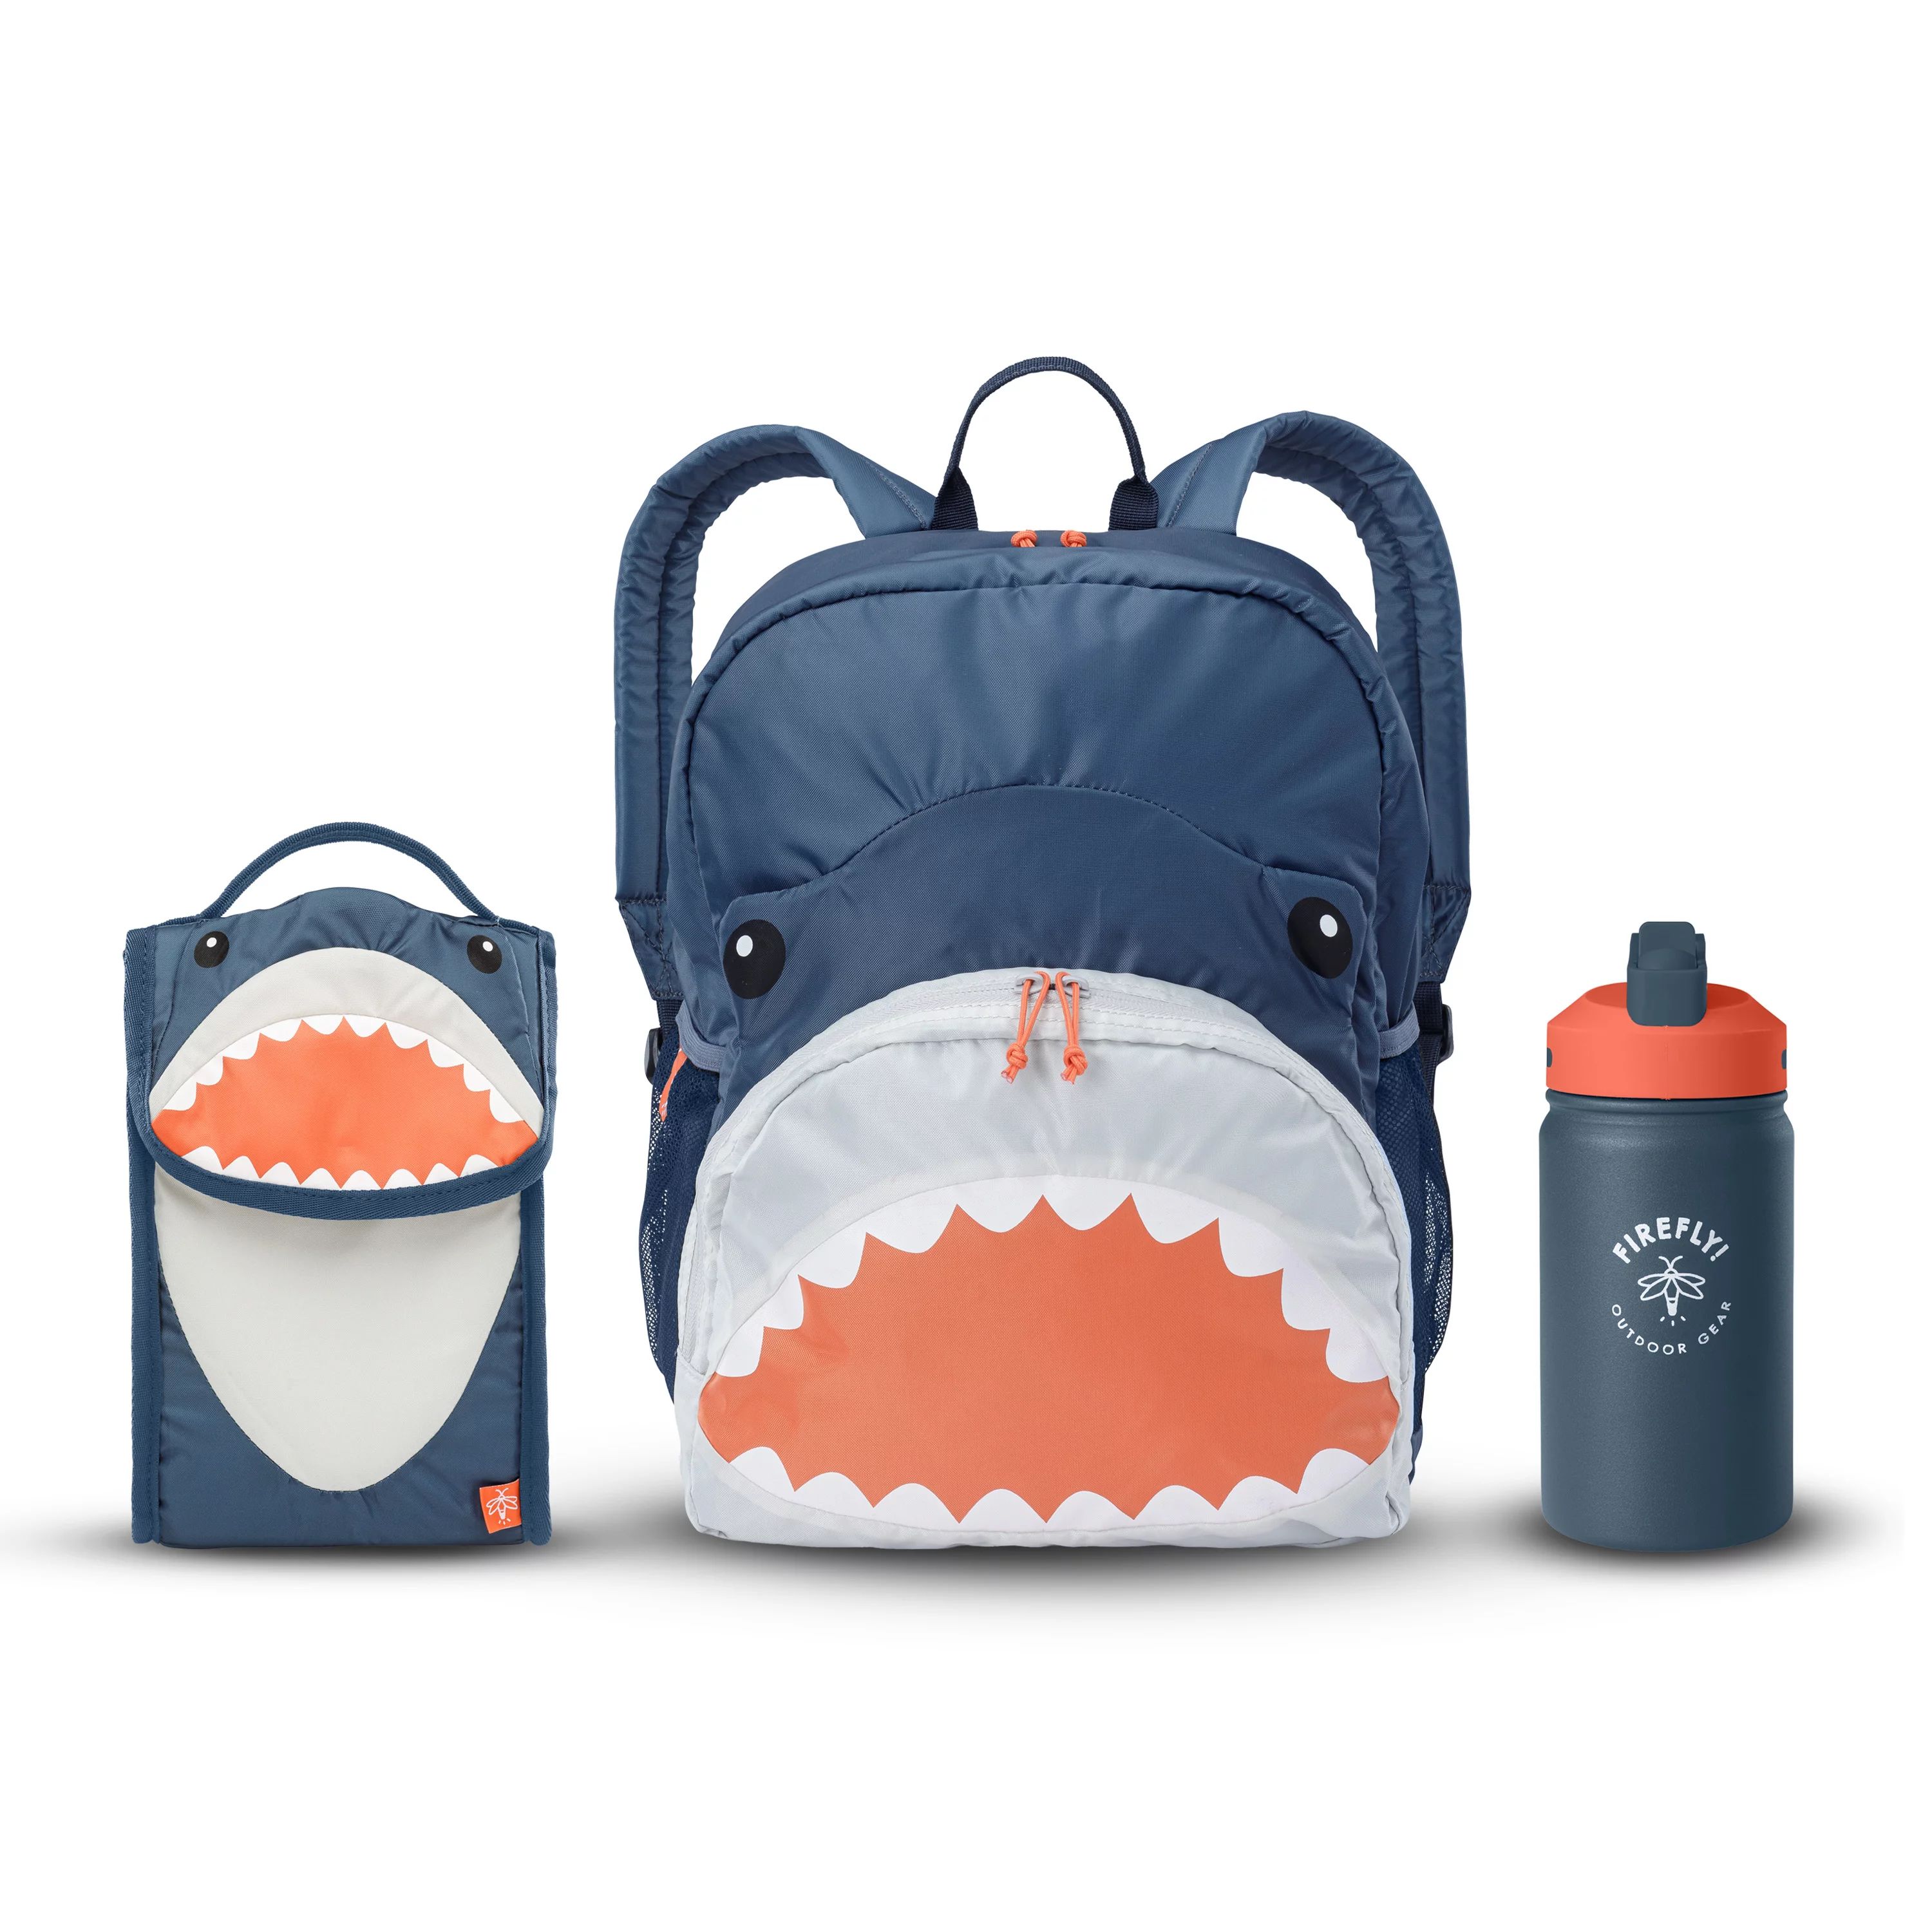 Firefly! Outdoor Gear Finn the Shark Kid's 3 Piece Combo Set (Includes Backpack, Lunch Bag, and W... | Walmart (US)